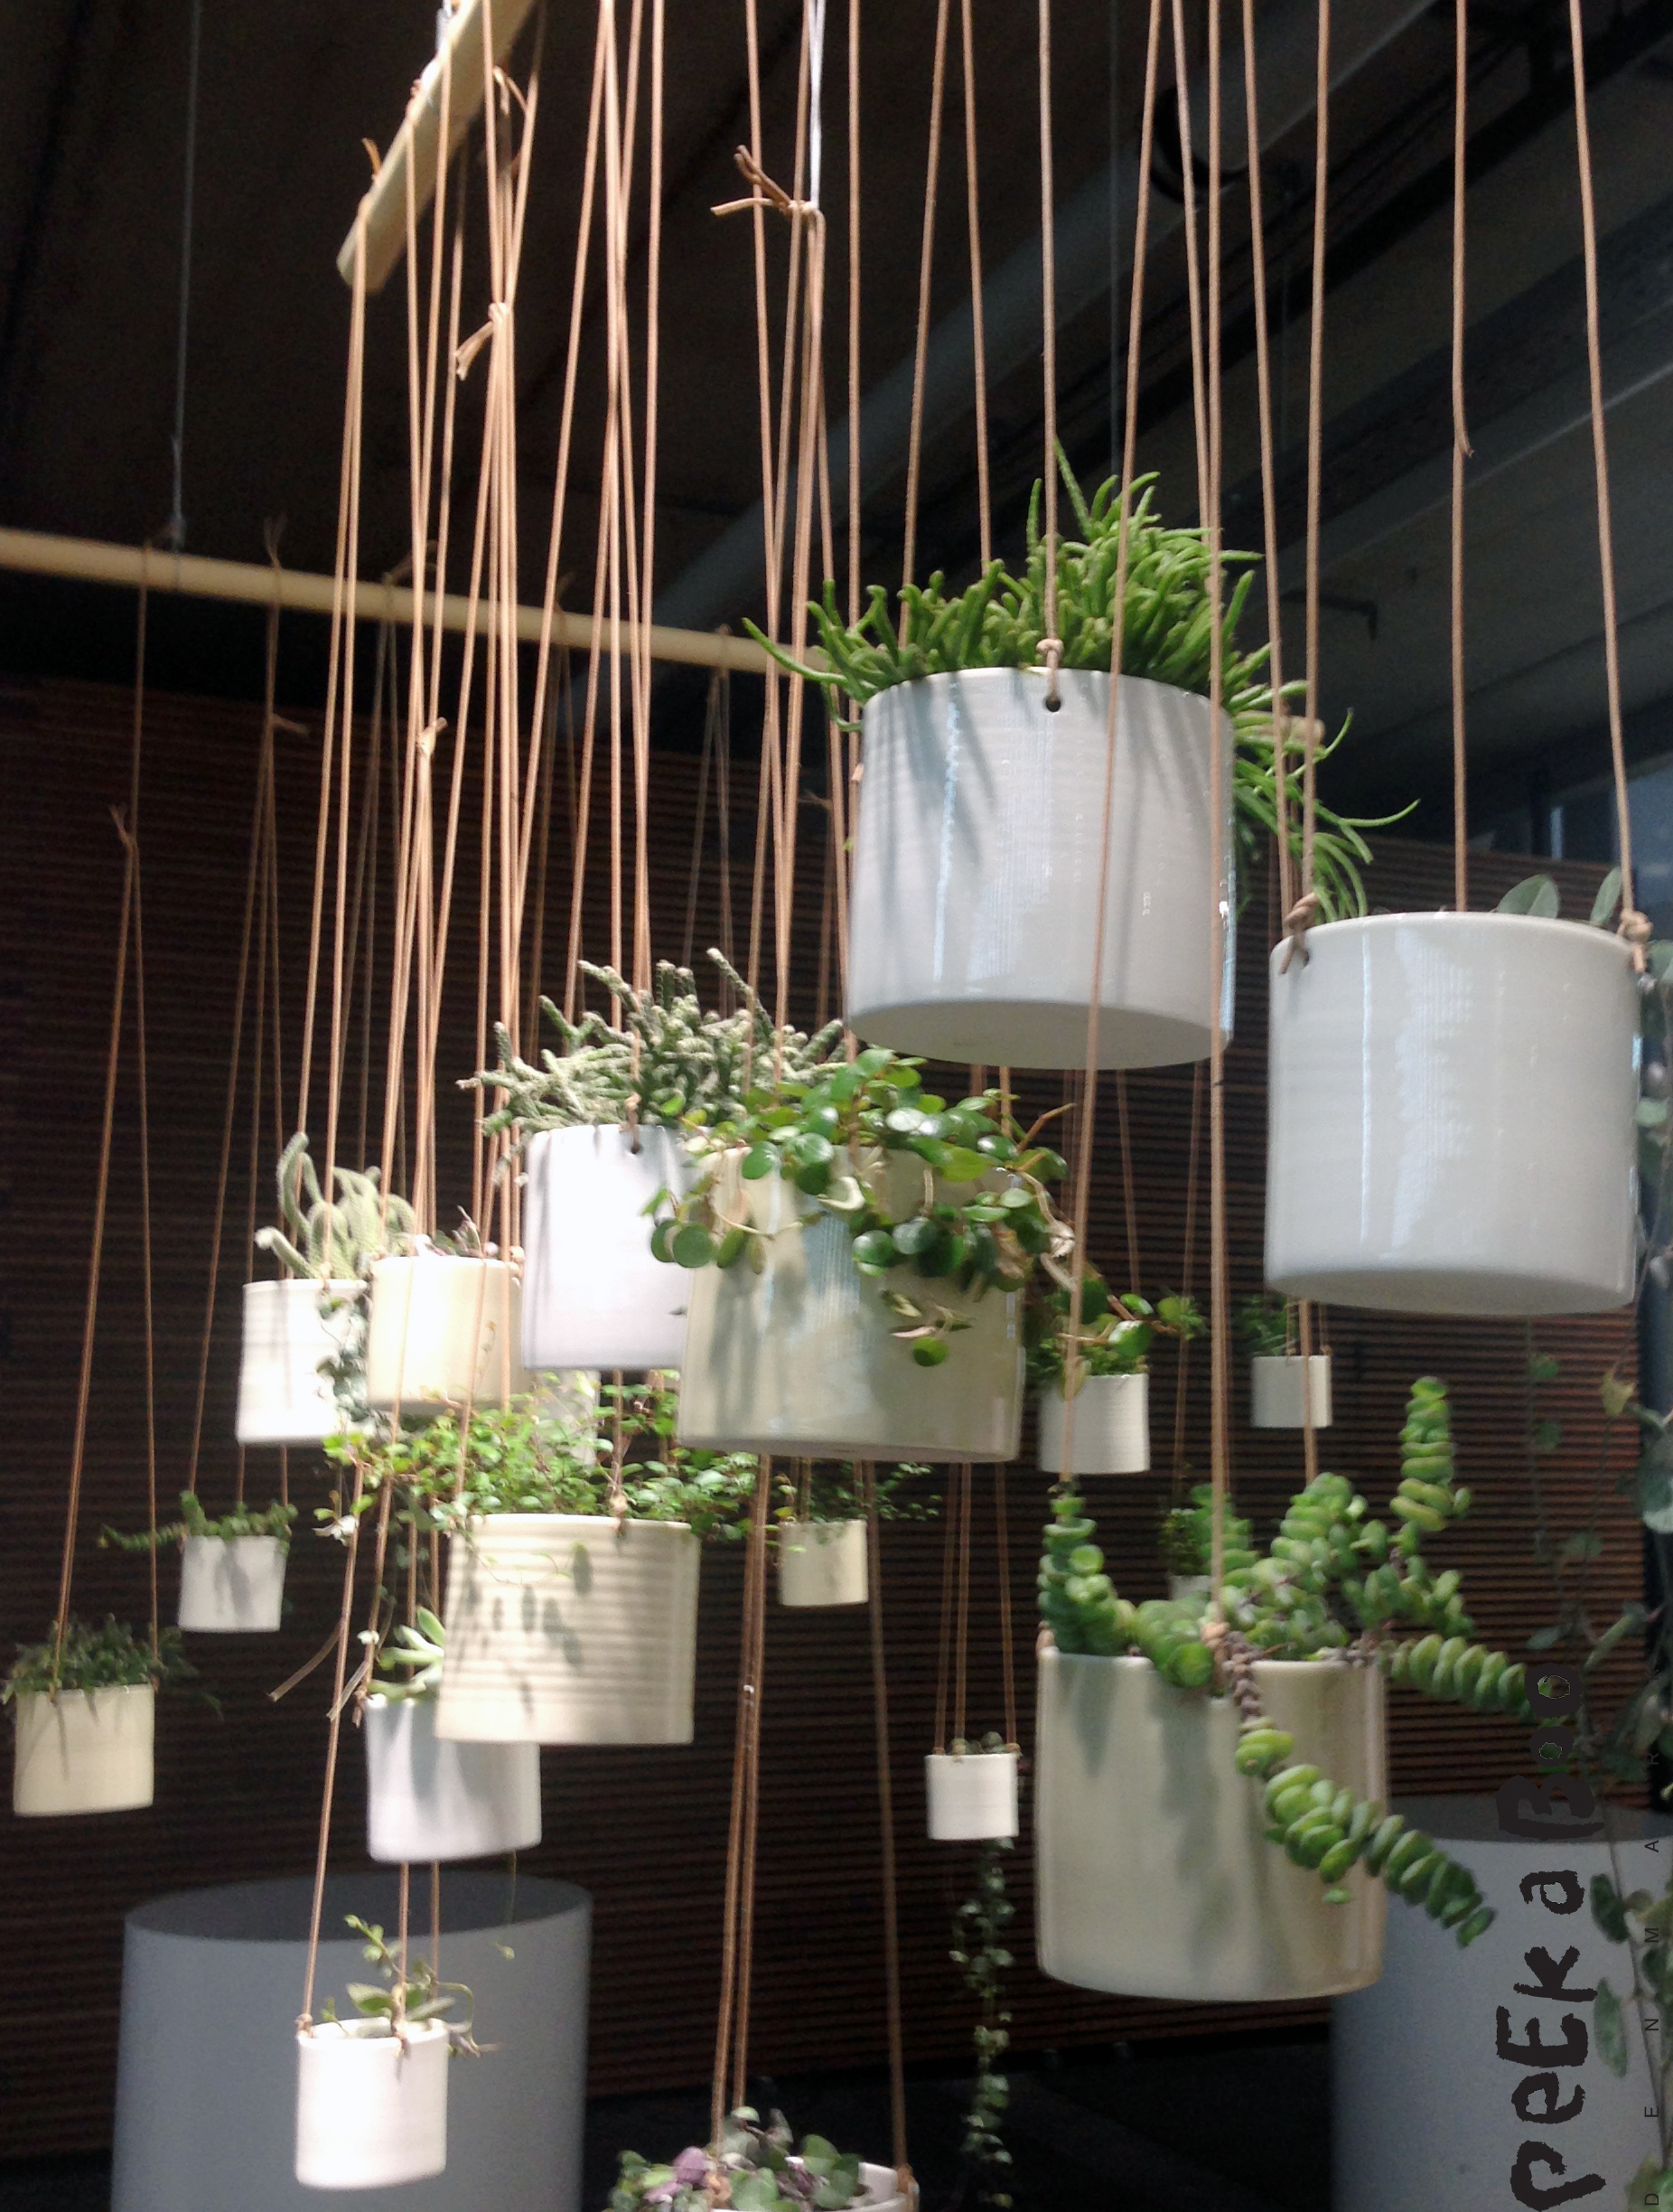 Anne Black's hanging pots. The design is simple and clean. Seen at North Modern.